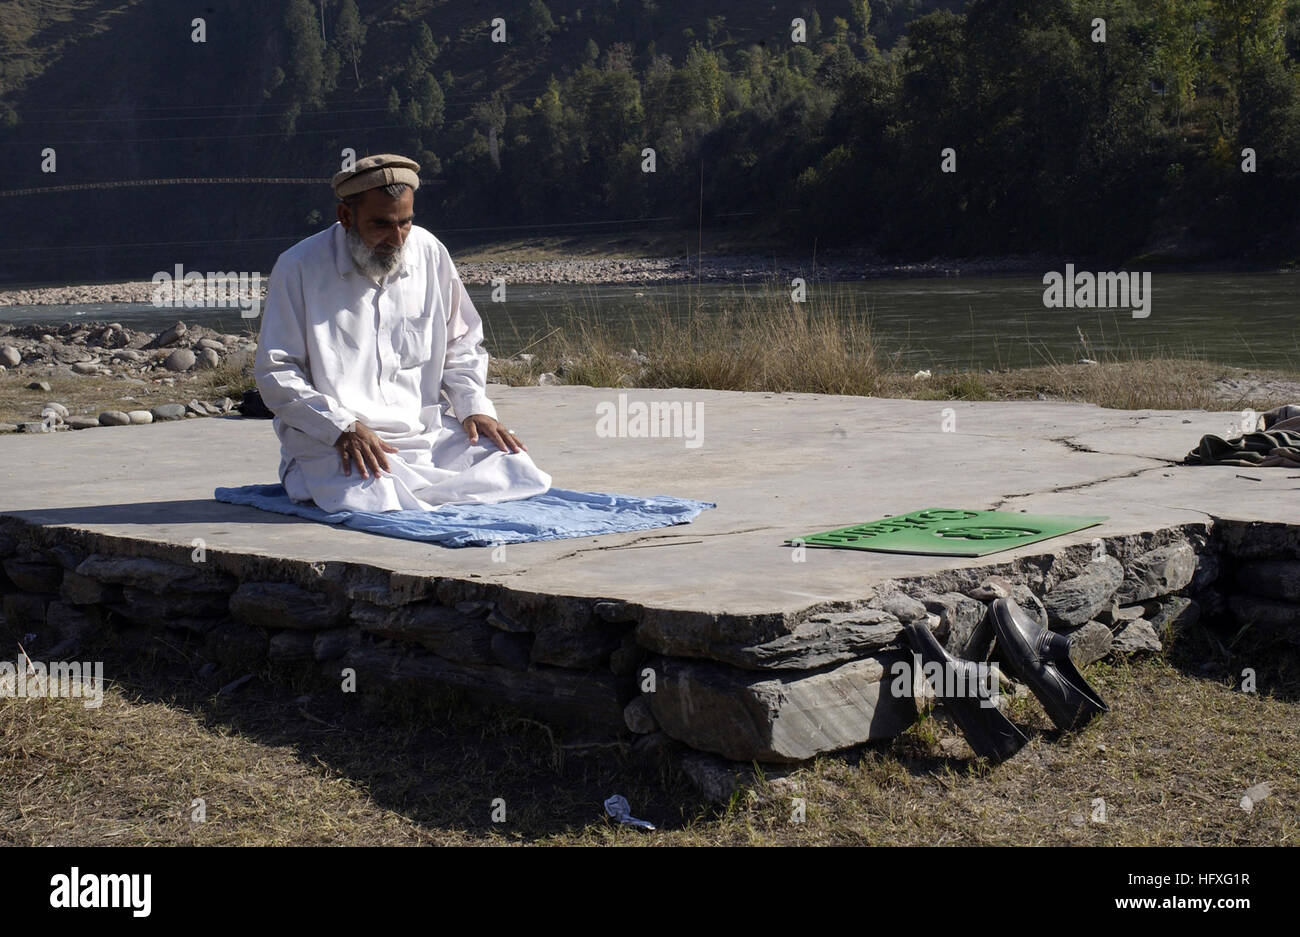 A Pakistani man prays at the Thuri Park tent village mosque in Muzaffarabad, Pakistan, Nov. 13, 2005.  The U.S. government is participating in a multinational humanitarian assistance and support effort lead by the Pakistani government to bring aid to victims of the devastating earthquake that struck the region Oct. 8, 2005.  (U.S. Air Force photo by Airman 1st Class Barry Loo) (Released) US Navy 051113-F-2729L-008 A Pakistani man prays at the Thuri Park Tent Village mosque in Muzaffarabad, Pakistan Stock Photo